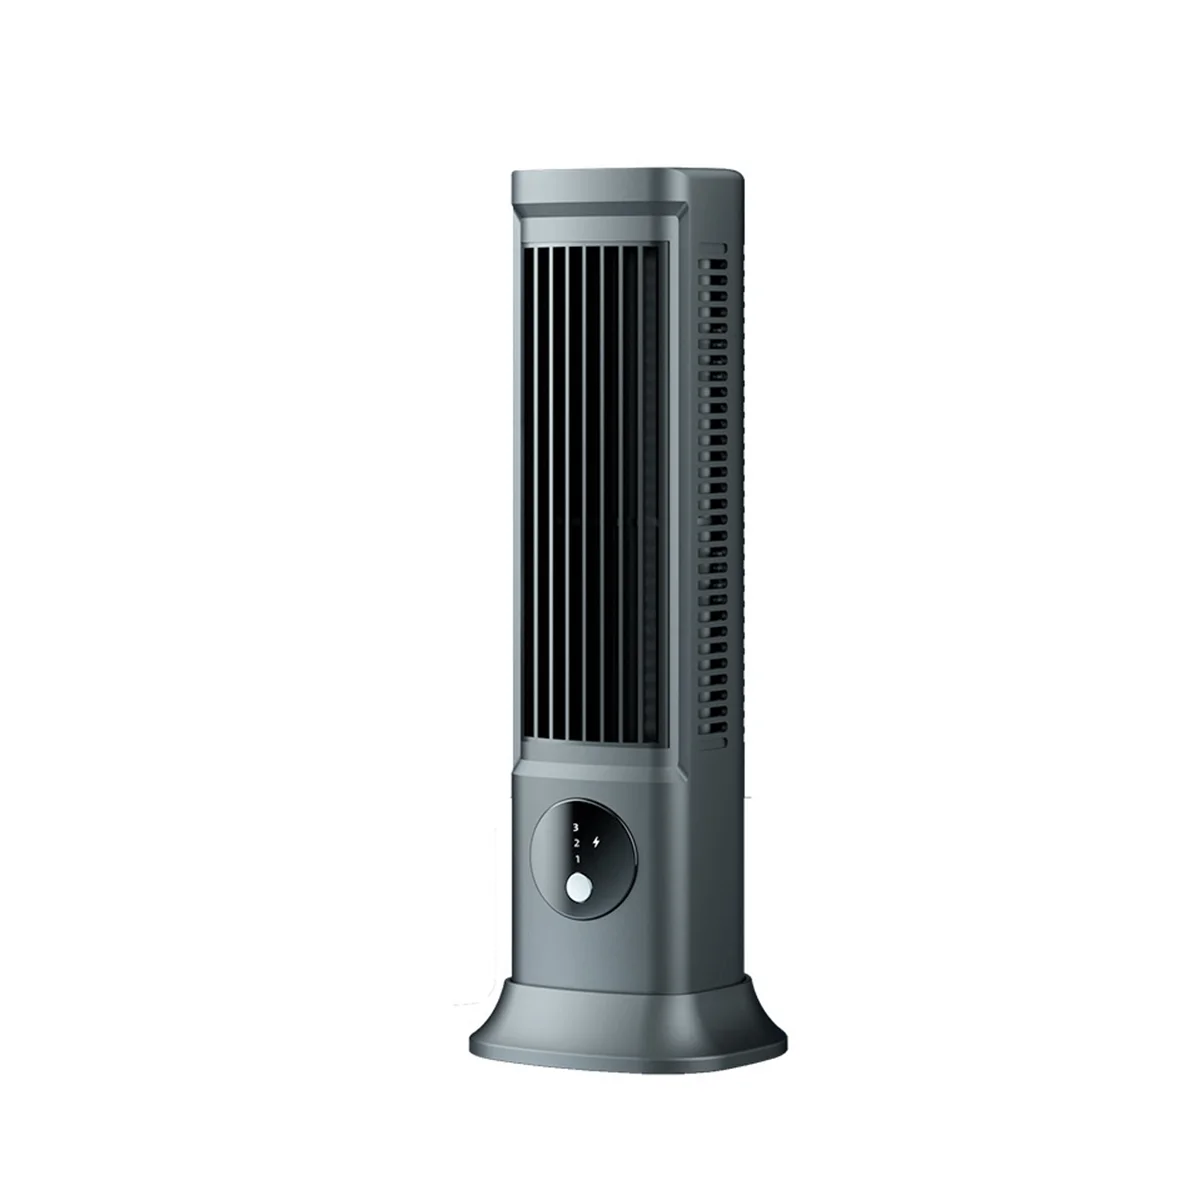 

Desktop Bladeless Fan, USB Rechargeable Portable Air Conditioner 3 Speeds Silent Table Tower Fan